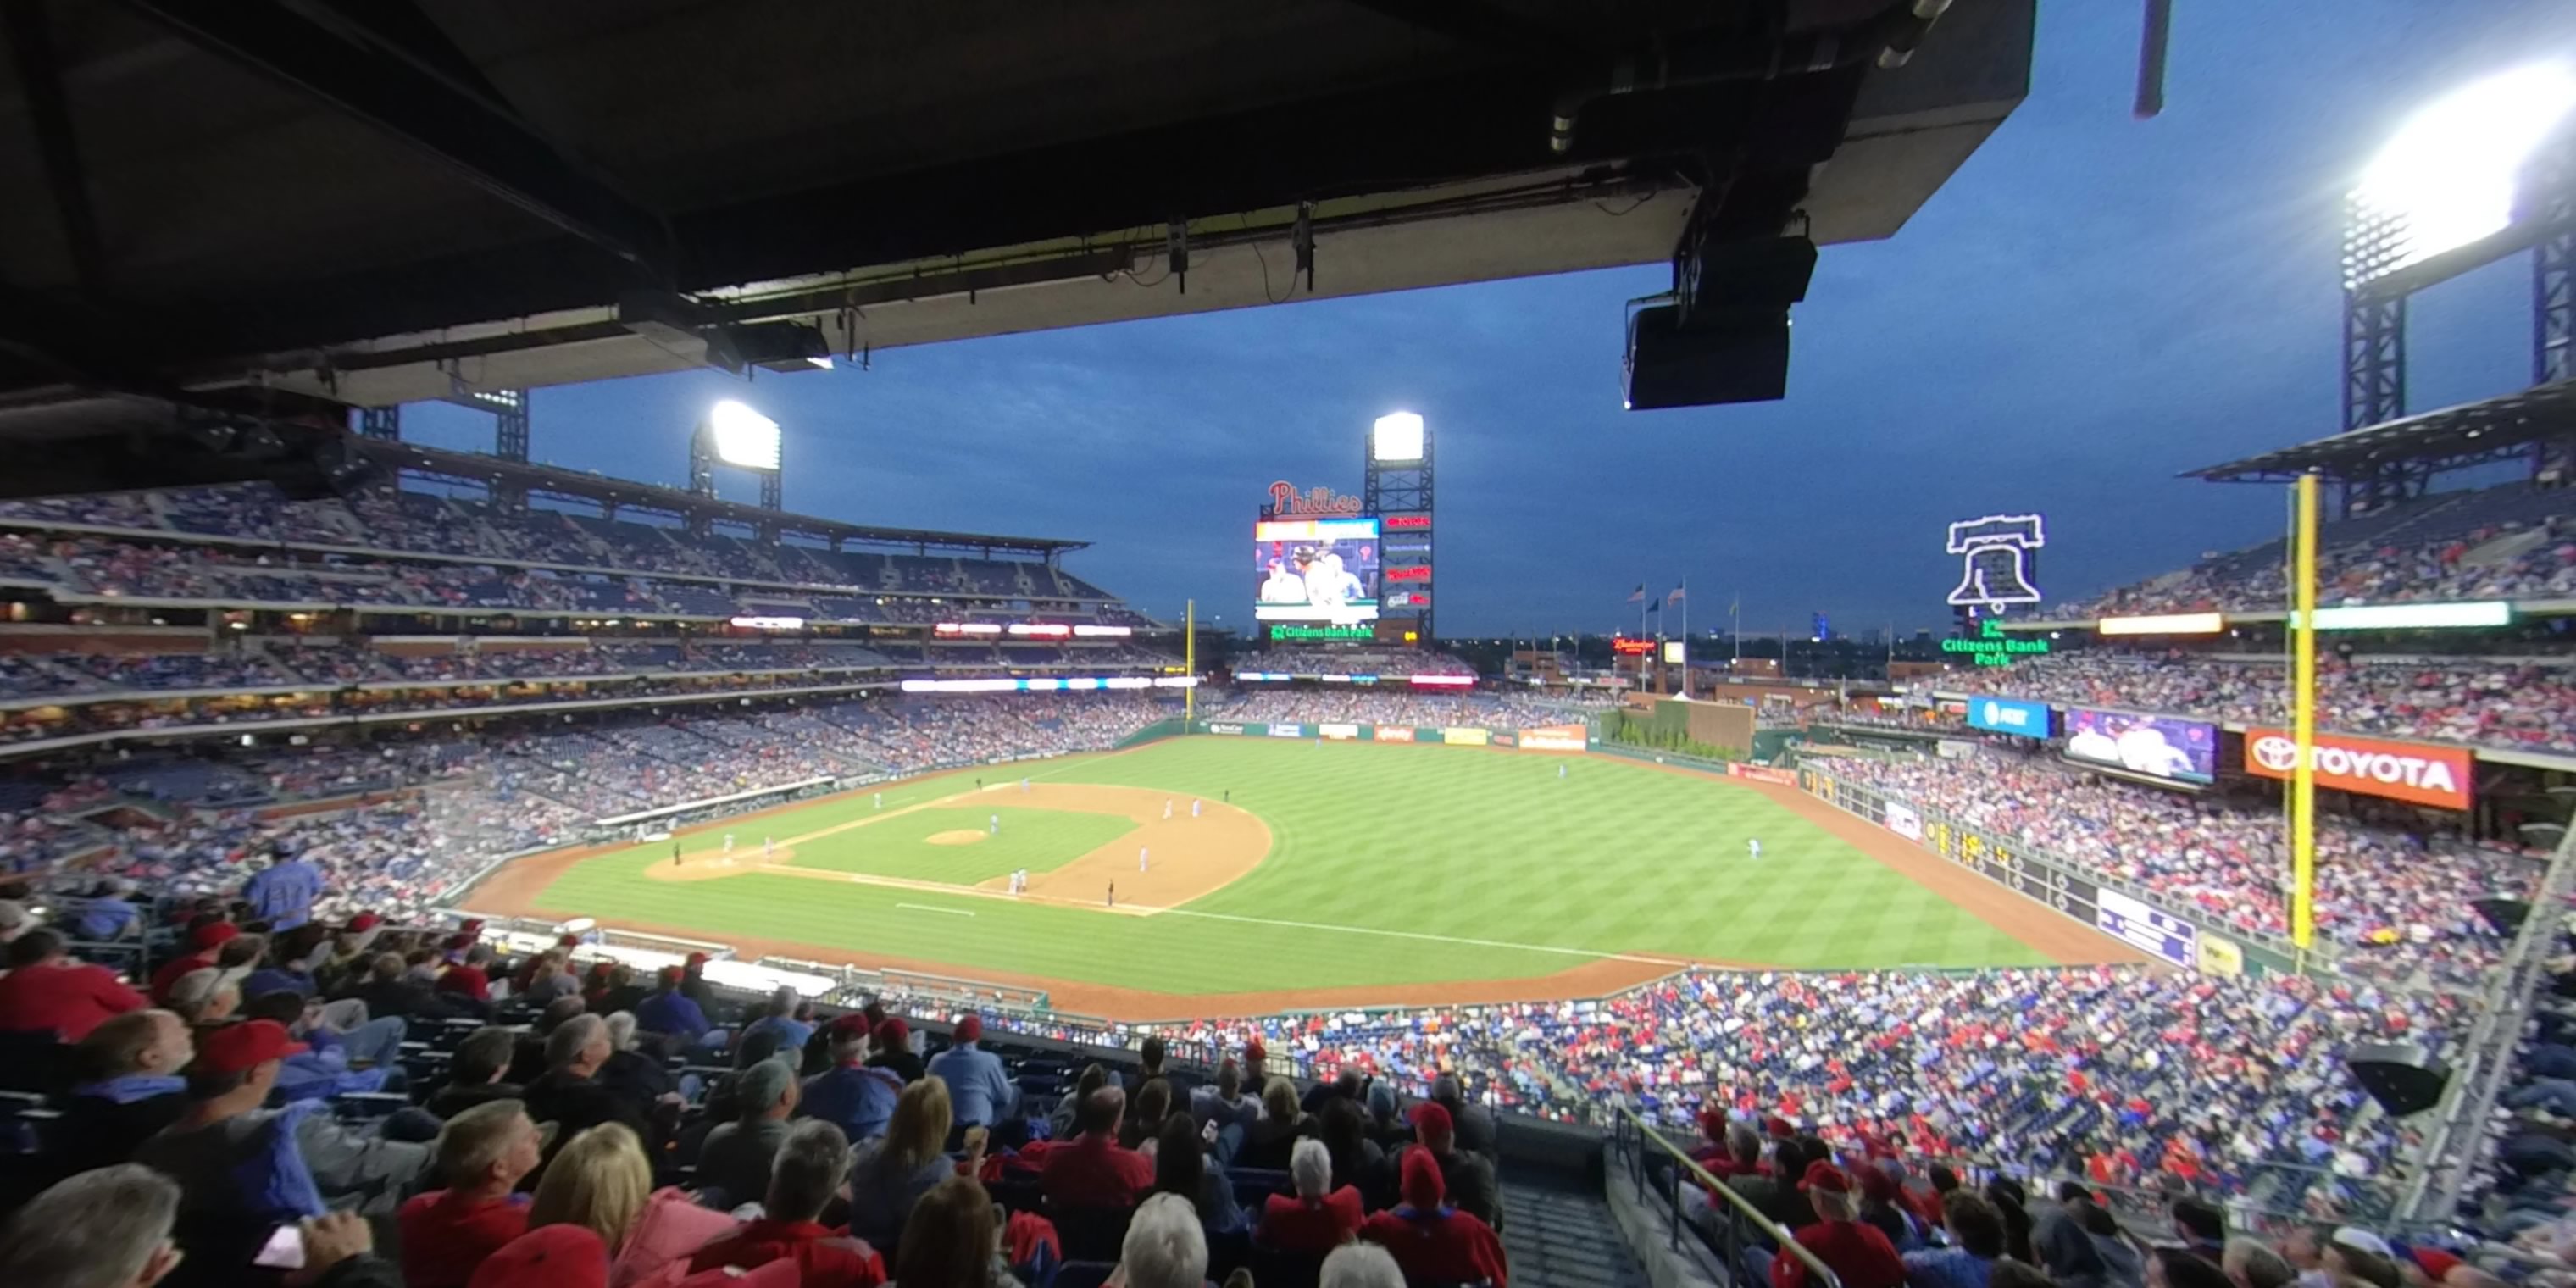 Section 212 at Citizens Bank Park 